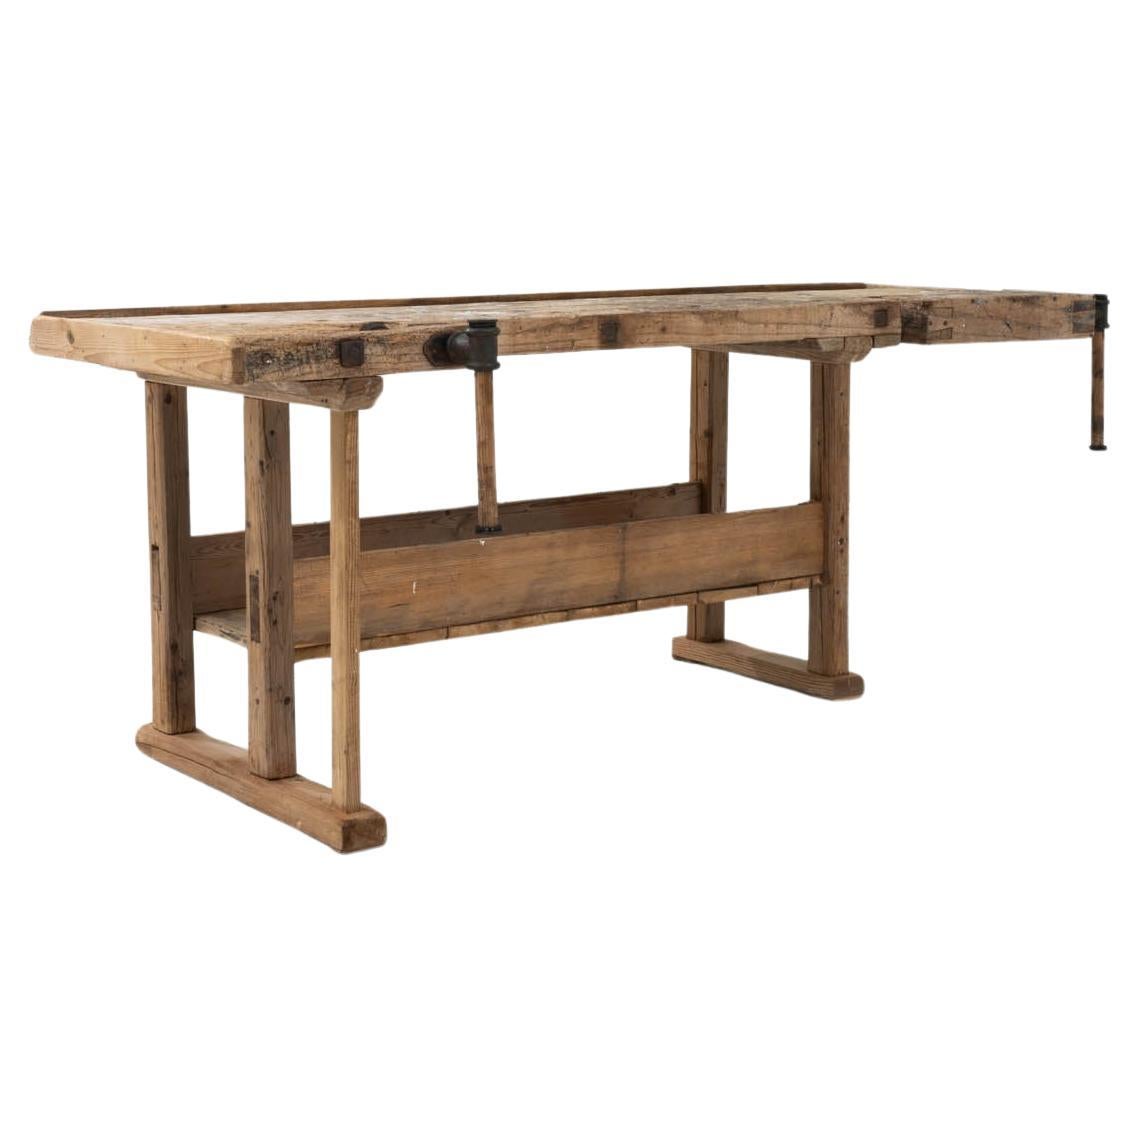 20th Century Czech Wooden Work Table For Sale